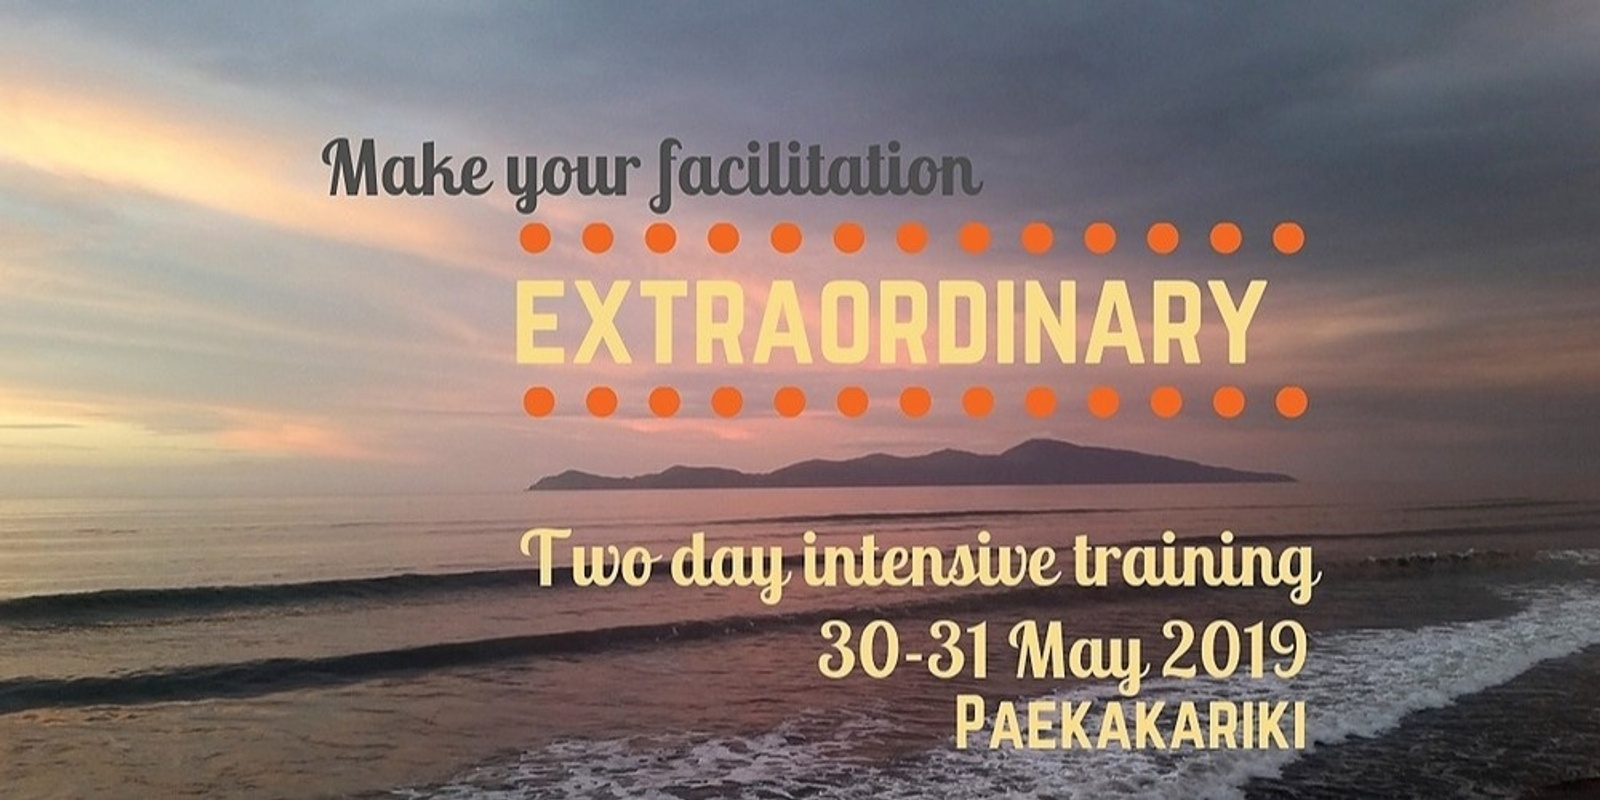 Banner image for Extraordinary Facilitation - two days at the beach